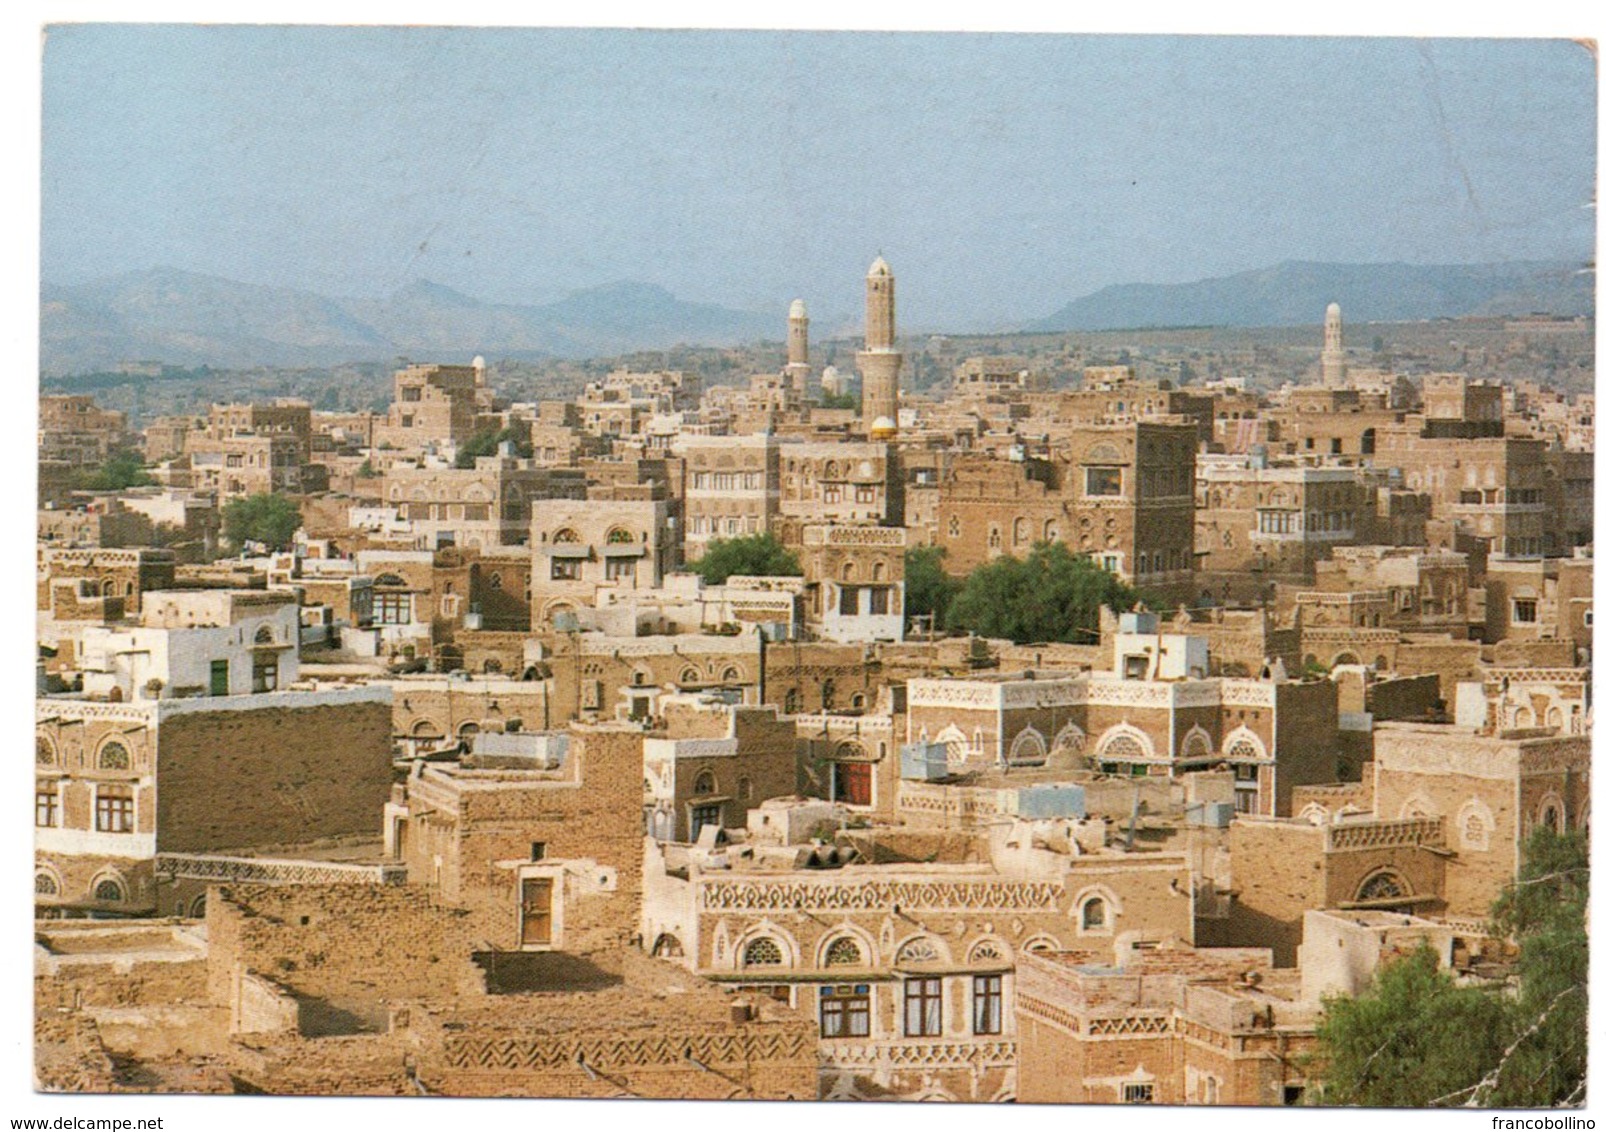 YEMEN A.R. - SANA'A/SANAA - OVERVIEW OF THE OLD CITY / MOSQUE / THEMATIC STAMPS-FOOTBALL WORLD CUP - Yemen